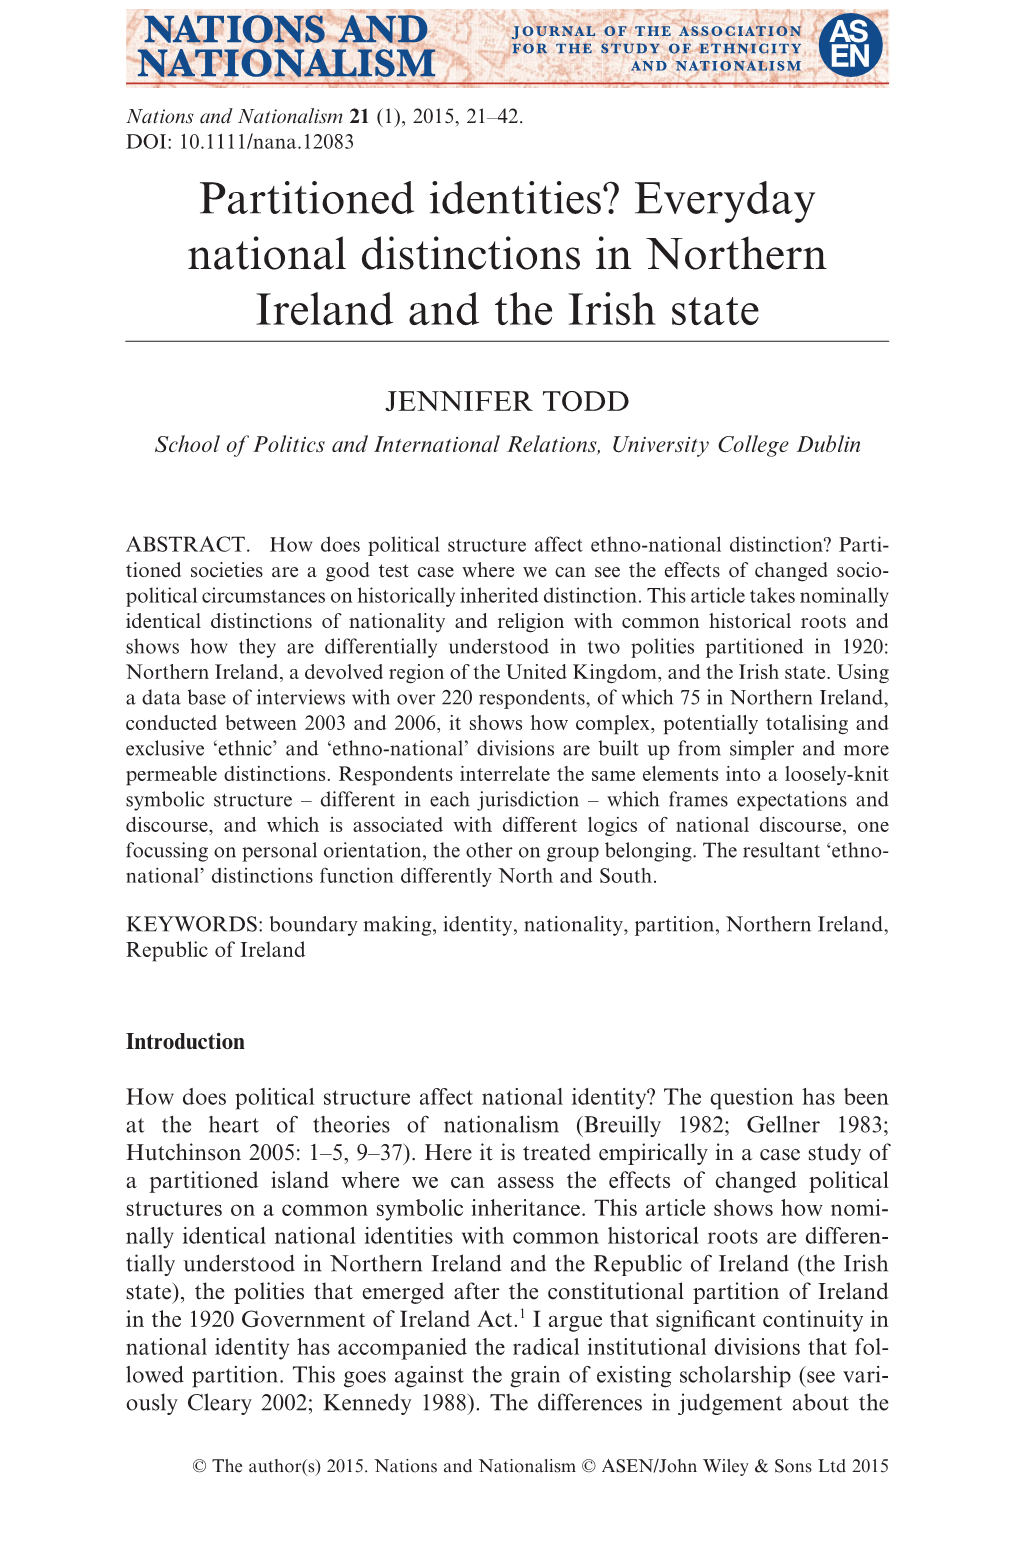 Partitioned Identities? Everyday National Distinctions in Northern Ireland and the Irish State